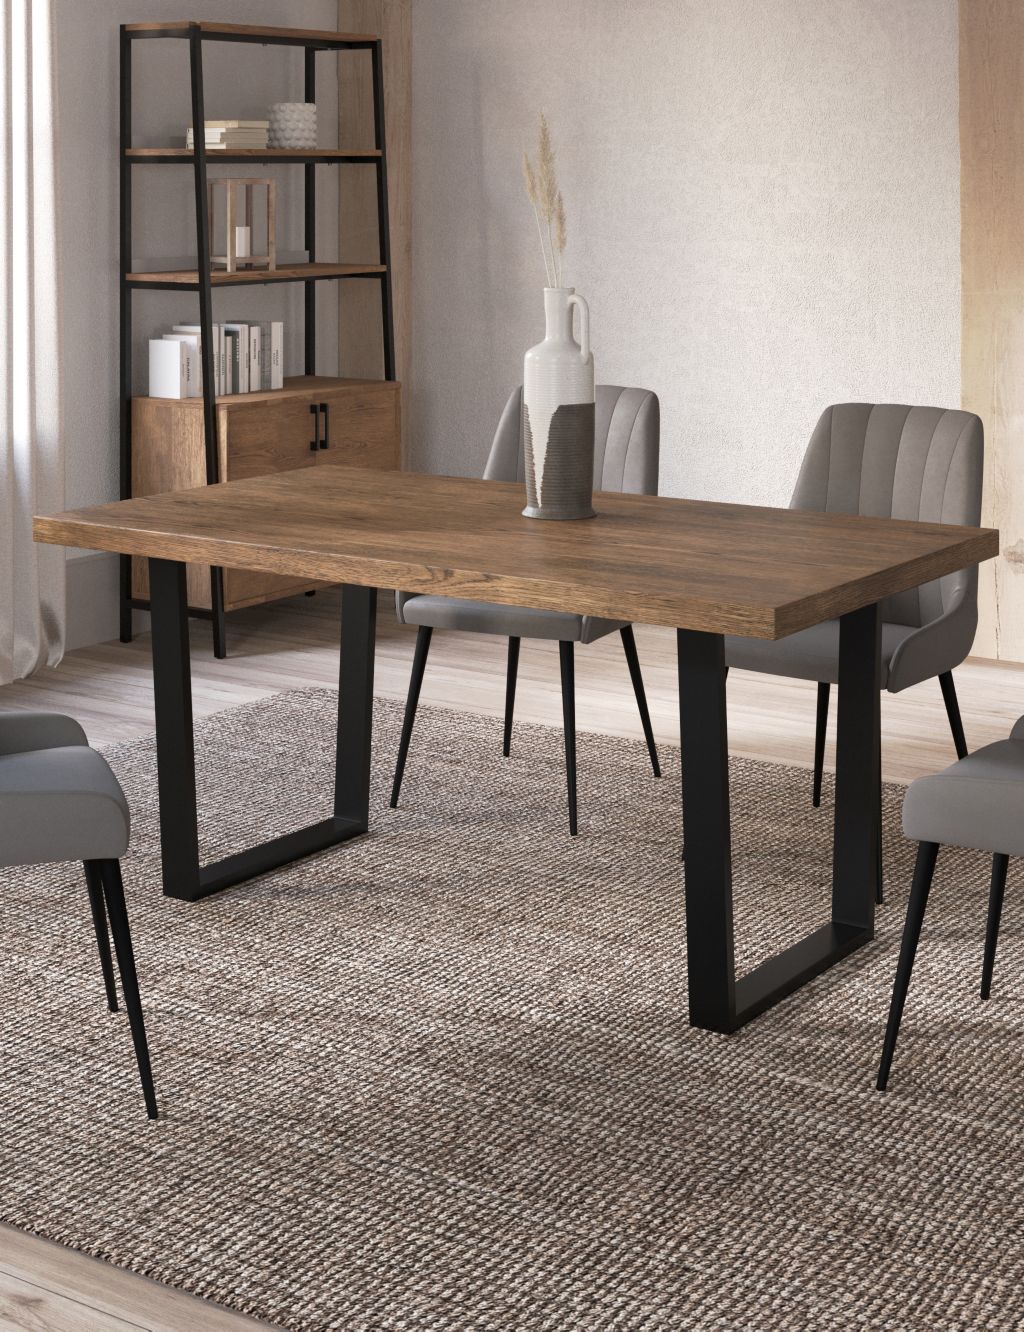 Brookland 6 Seater Dining Table image 1